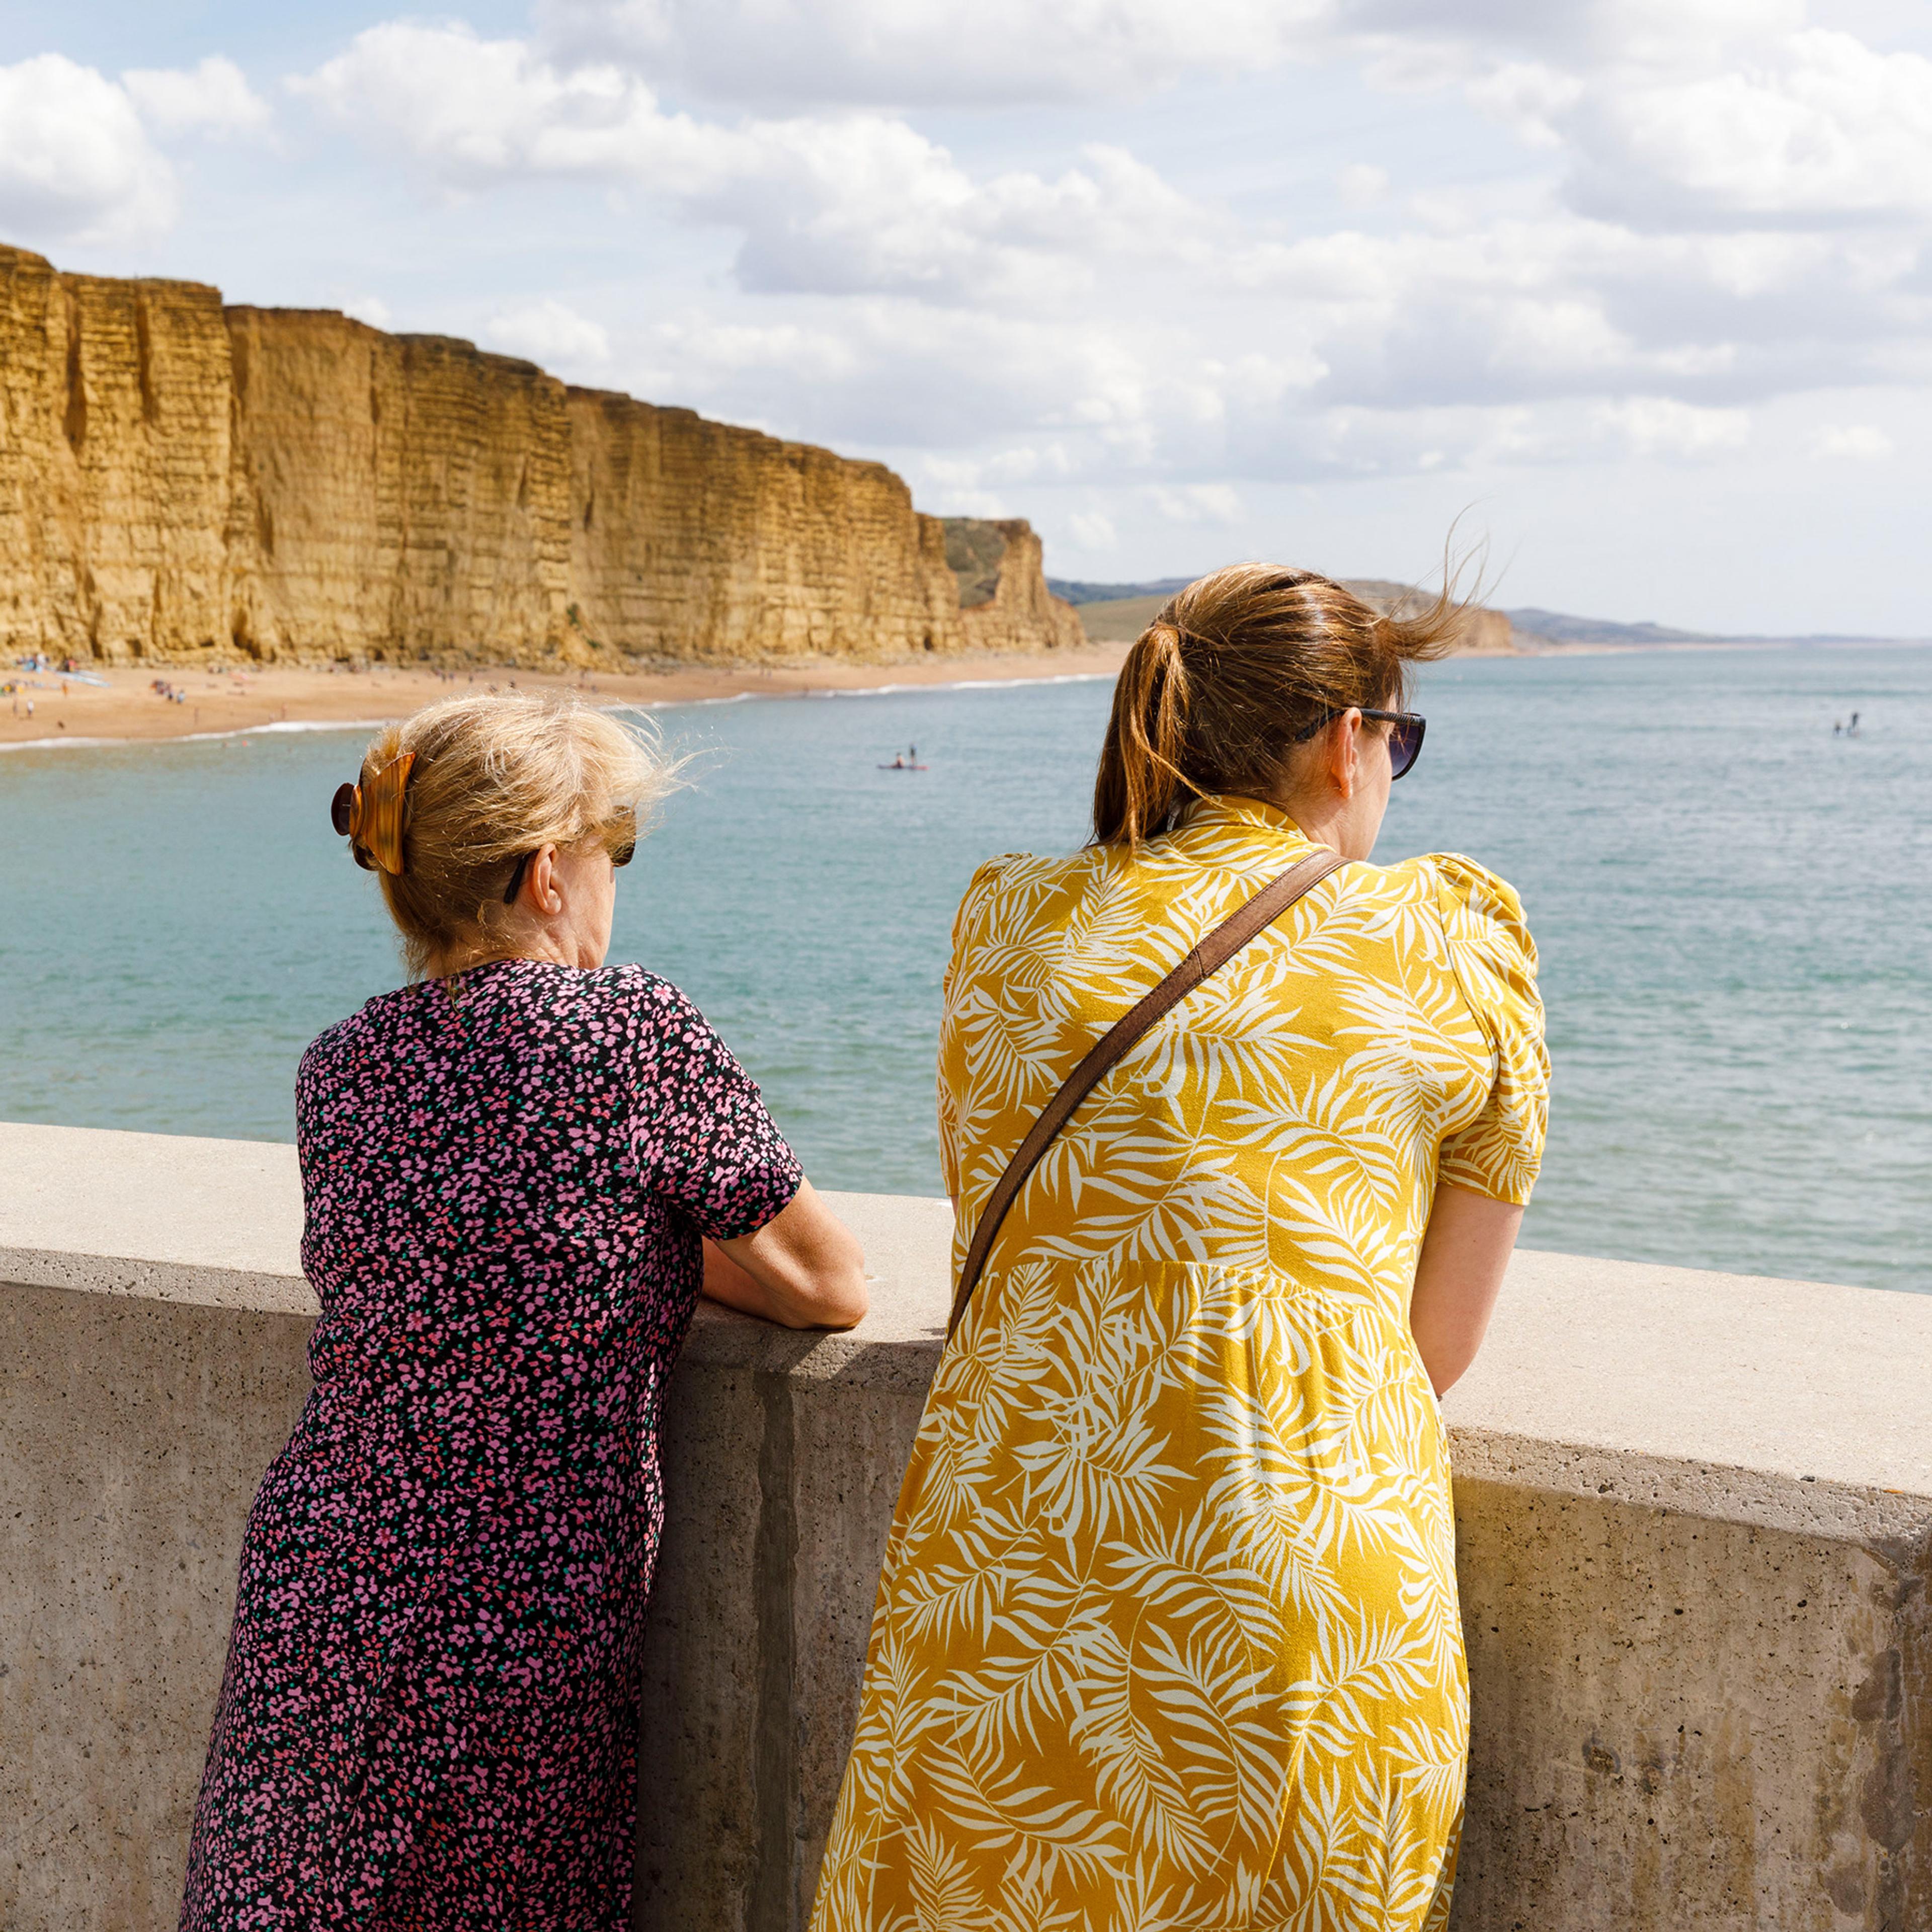 Two women in printed dresses stand at a concrete railing, overlooking a beach and cliffs with the sea stretching into the horizon.